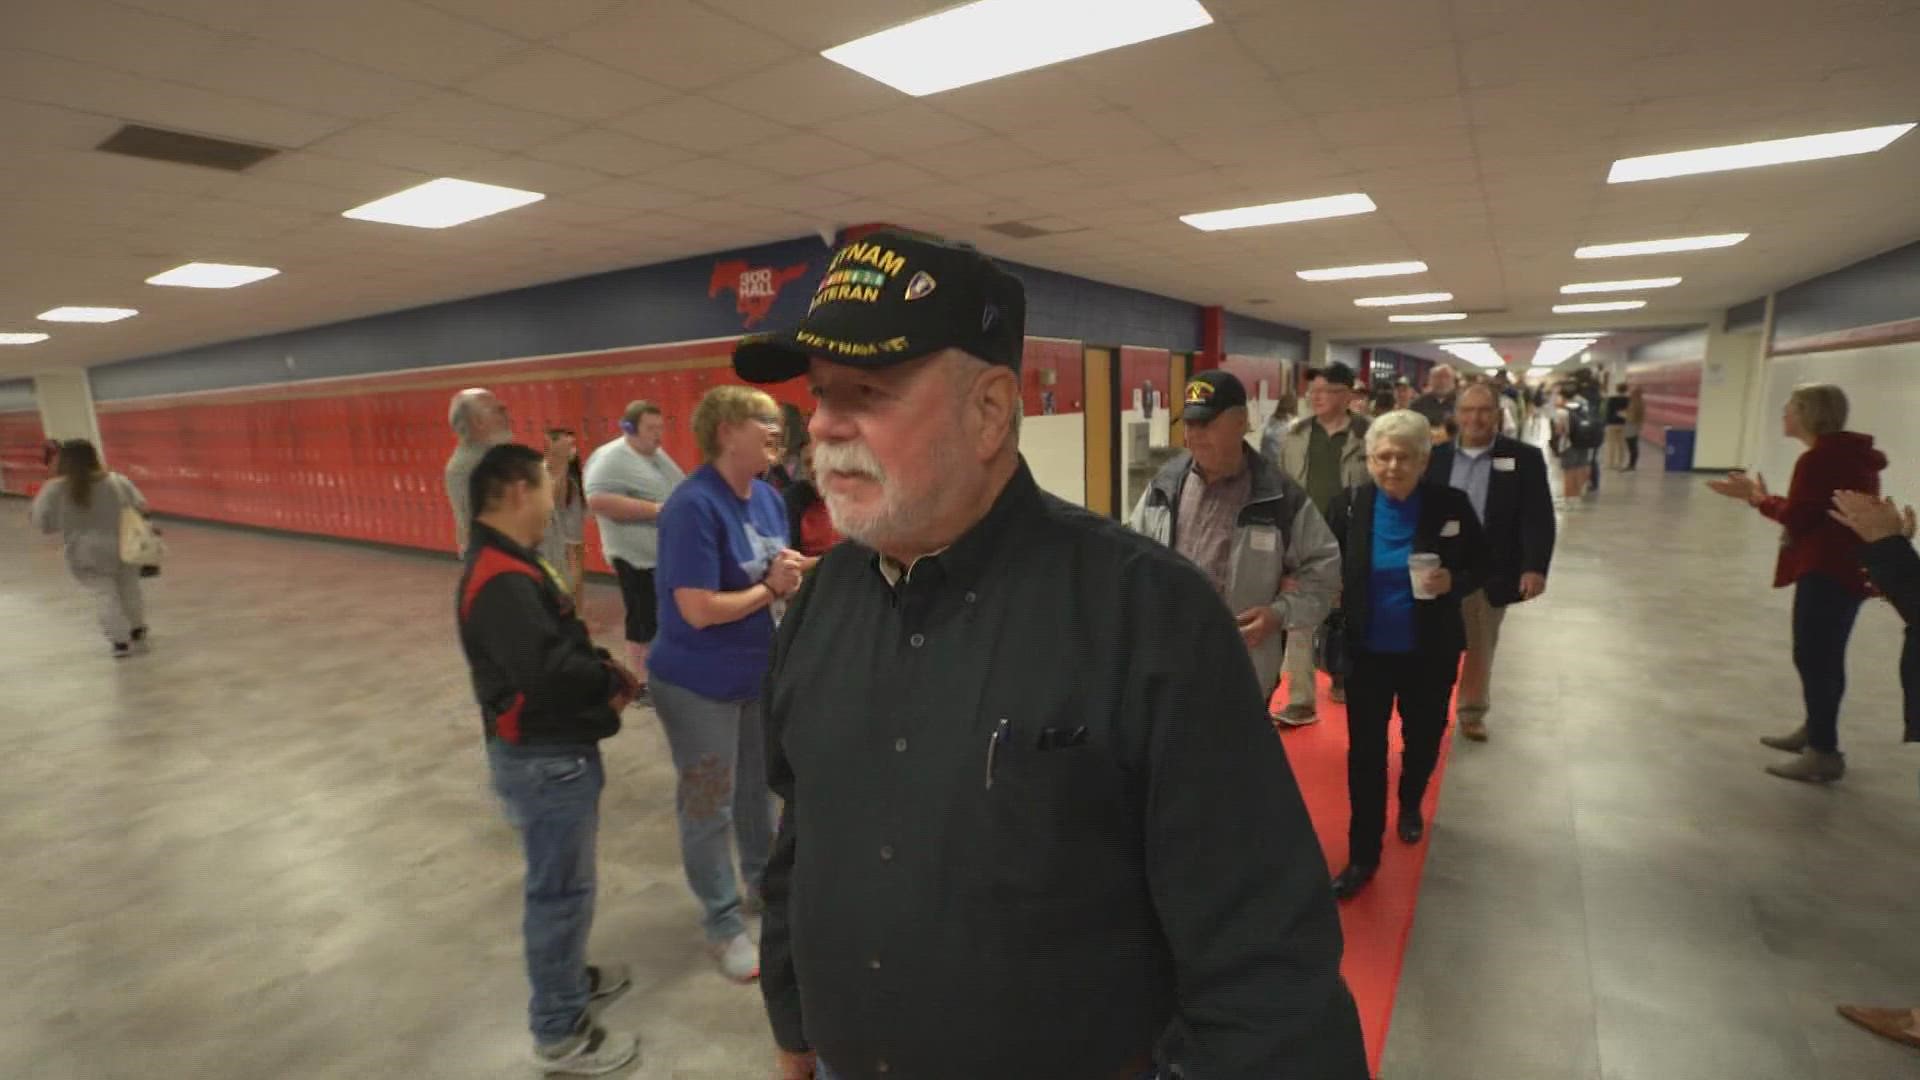 "It reaffirms my belief in the future of America," said Korean War veteran Randy Dellis of the Veterans Day event that has become an important GHS tradition.